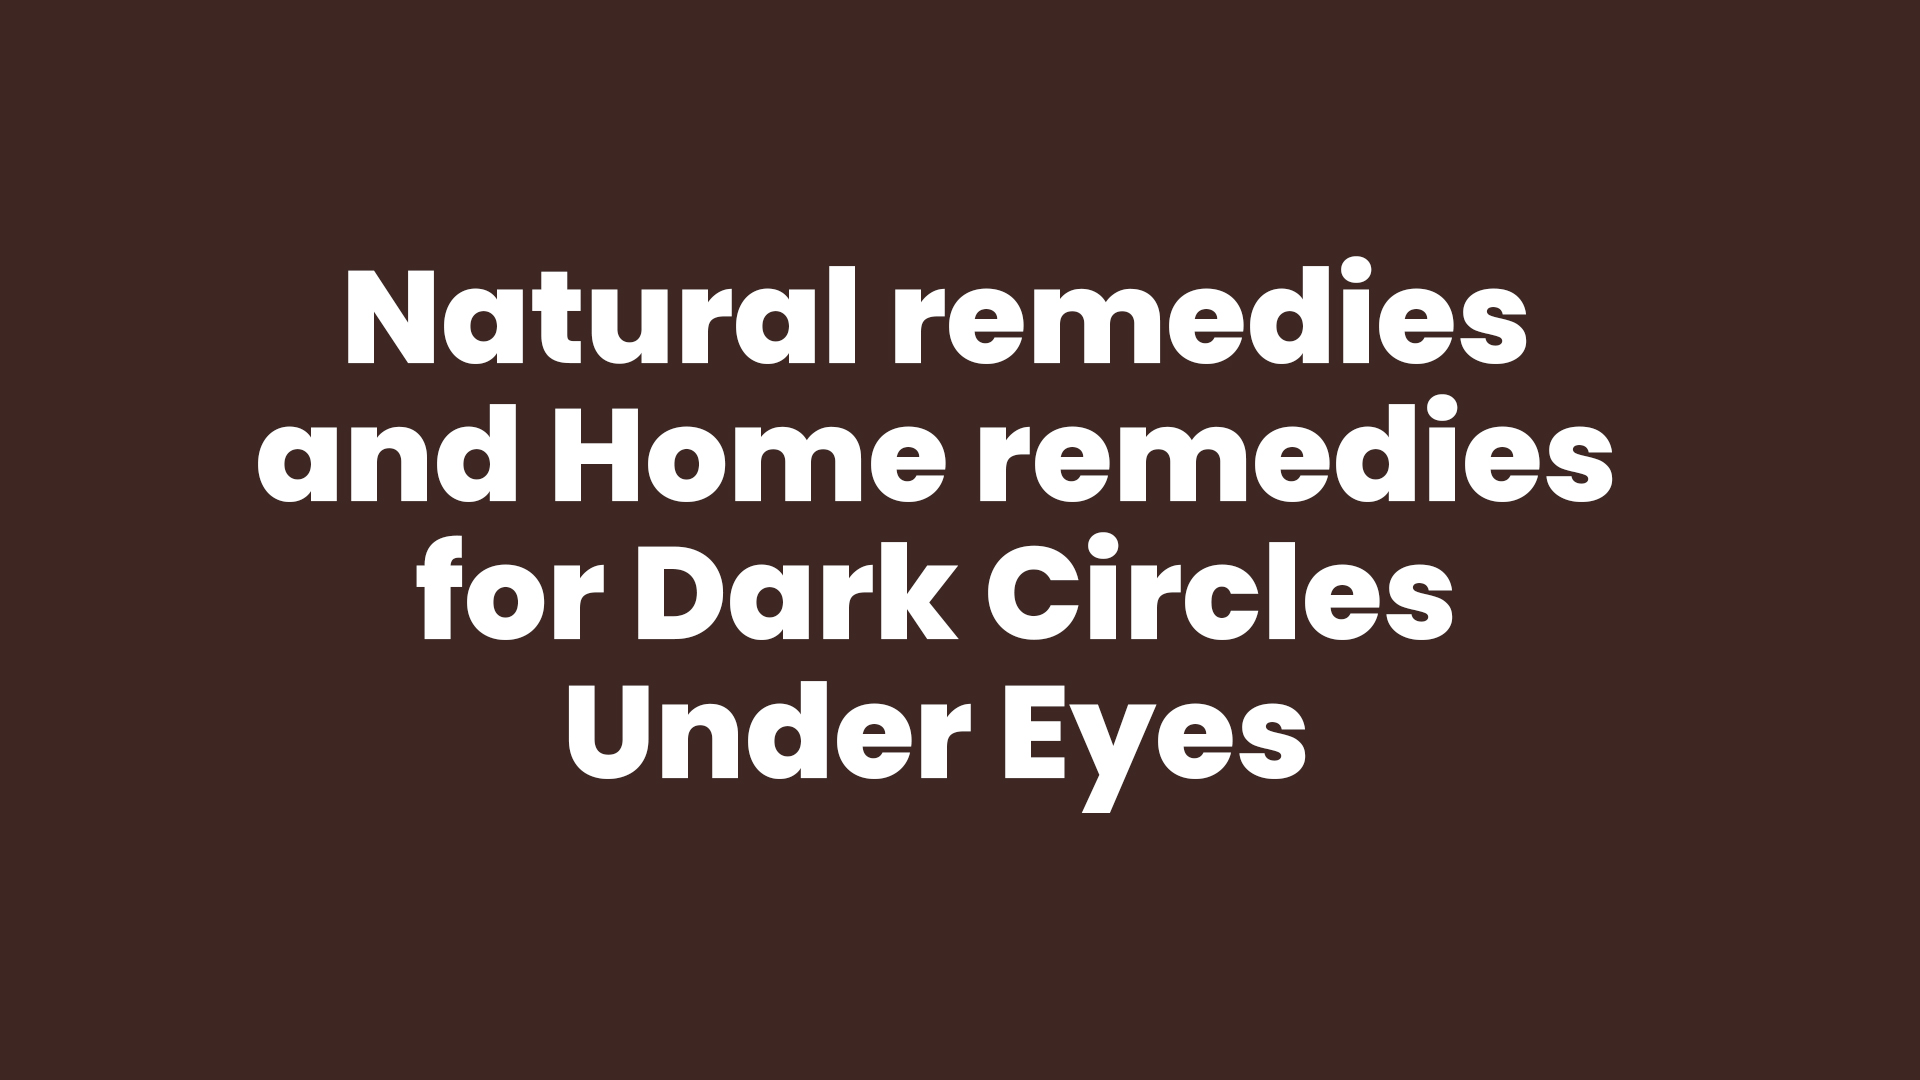 Natural remedies and Home remedies for Dark Circles Under Eyes